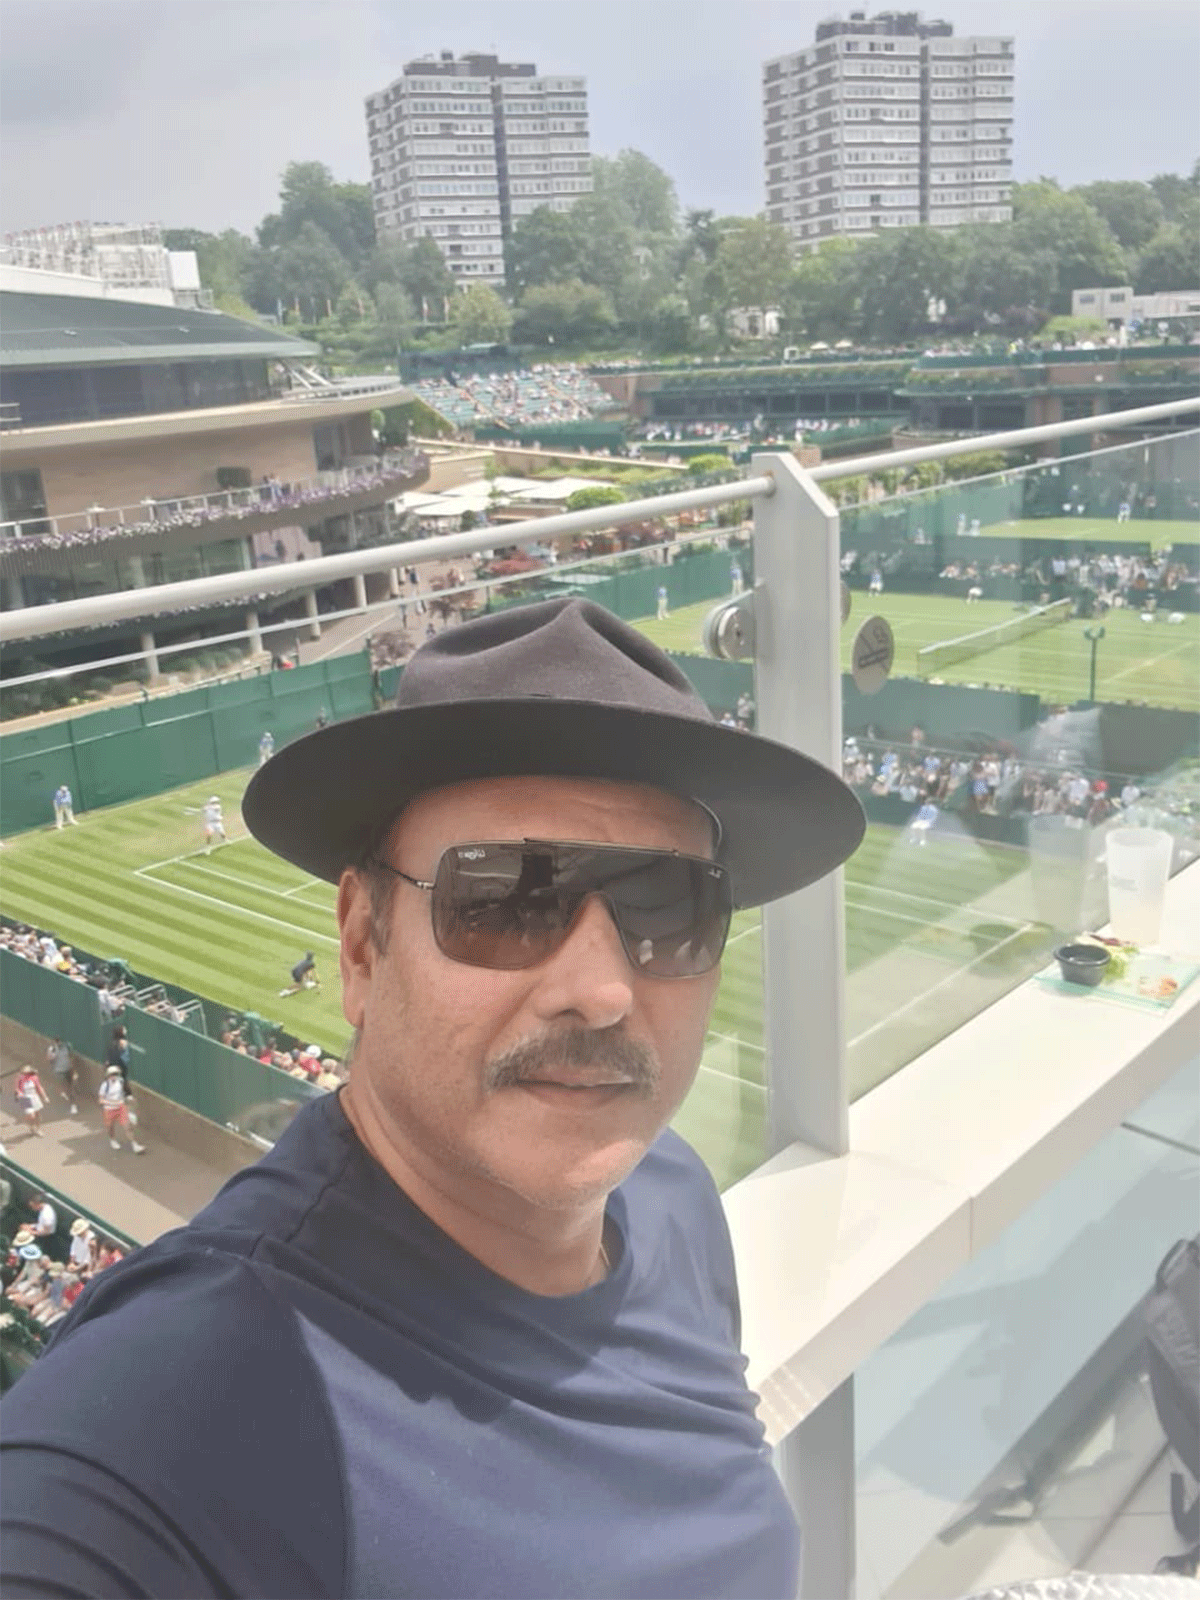 Ravi Shastri tweeted this selfie from the stands of Centre Court at Wimbledon